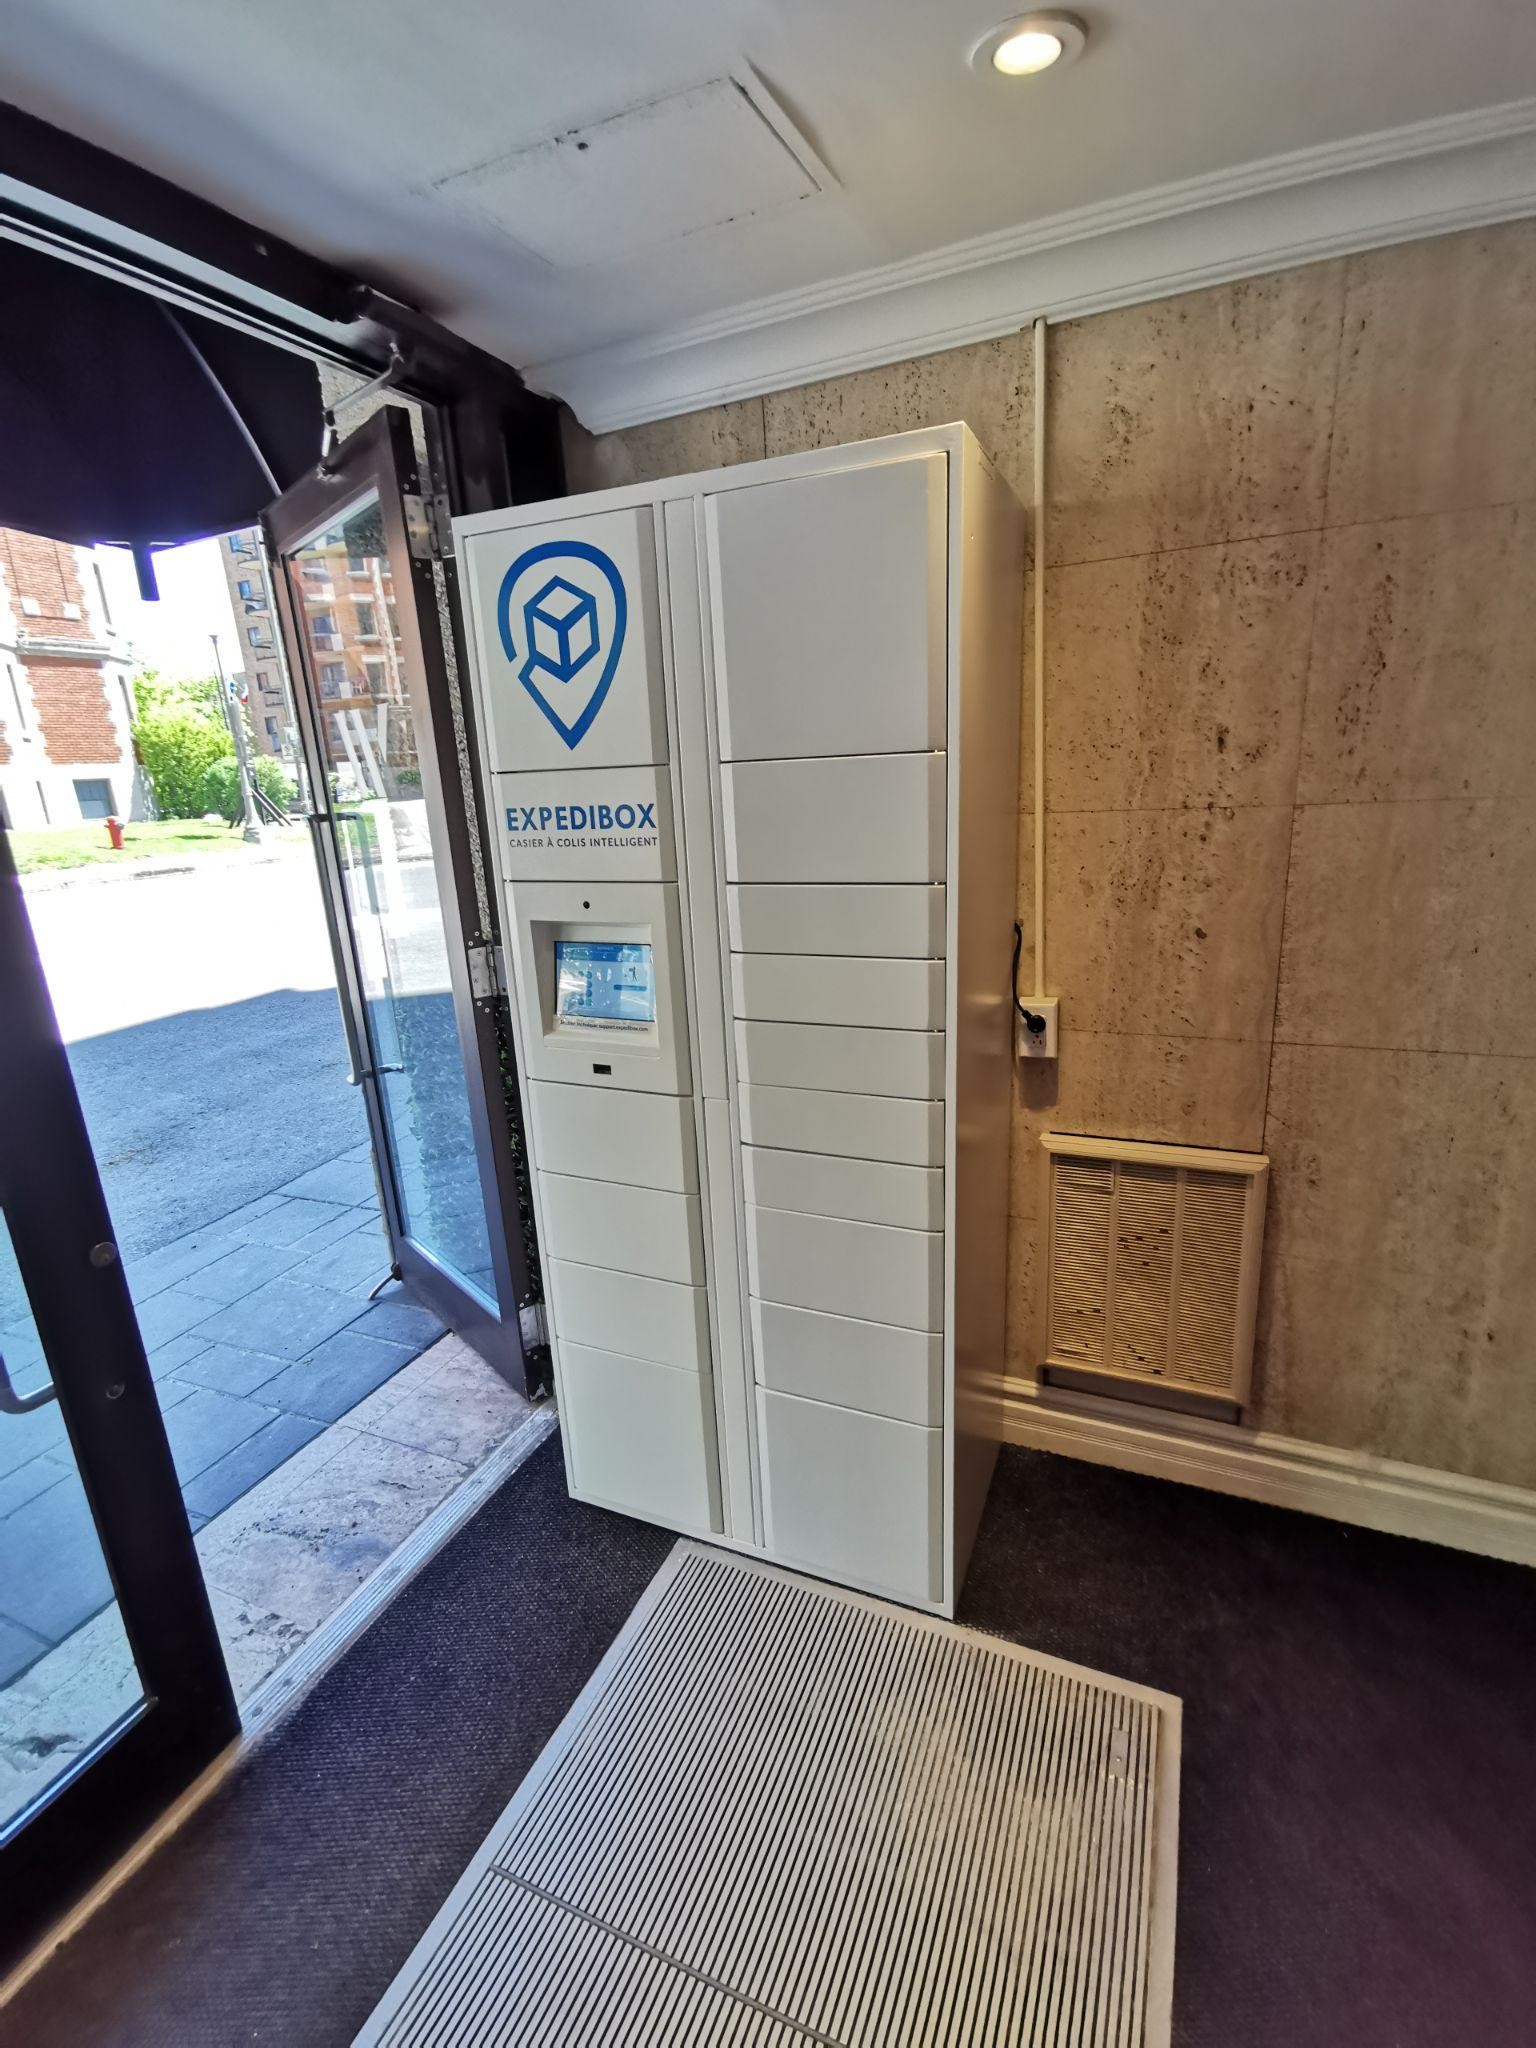 The realities of parcel lockers for Expedibox